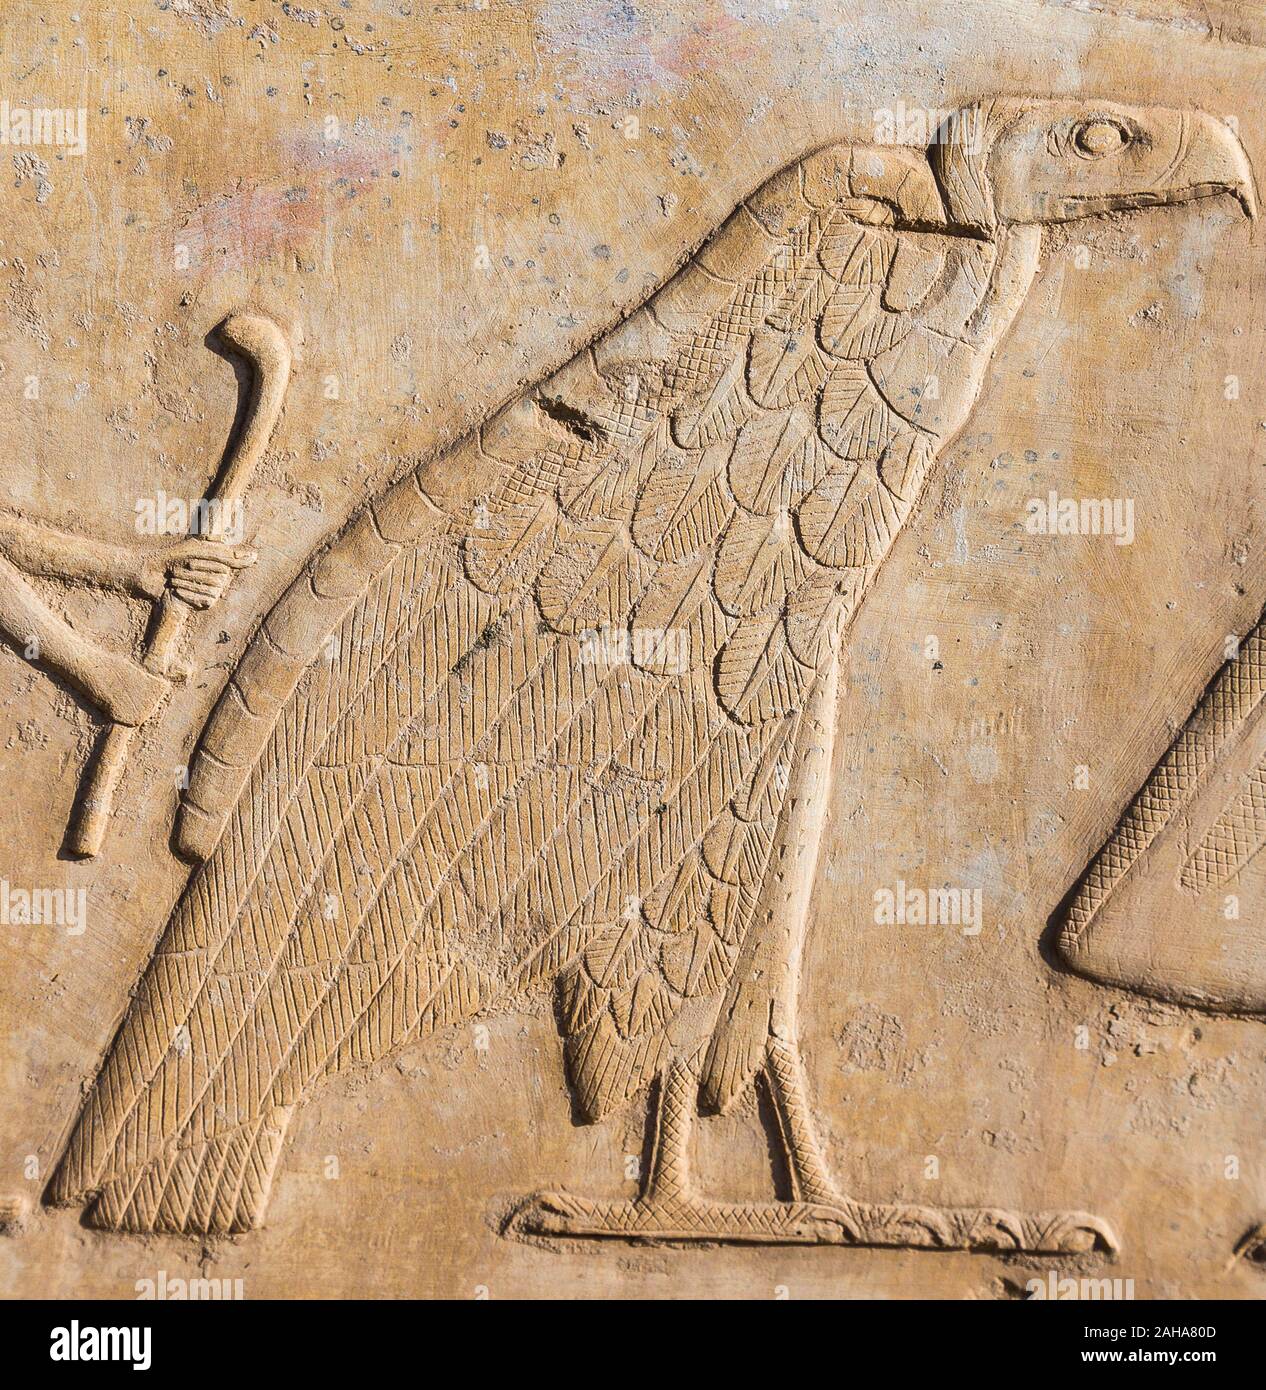 Thebes in Egypt, Karnak temple, Open Air Museum, a relief depicting the names of a king. The snake and the vulture symbolize 2 the goddesses of Egypt. Stock Photo